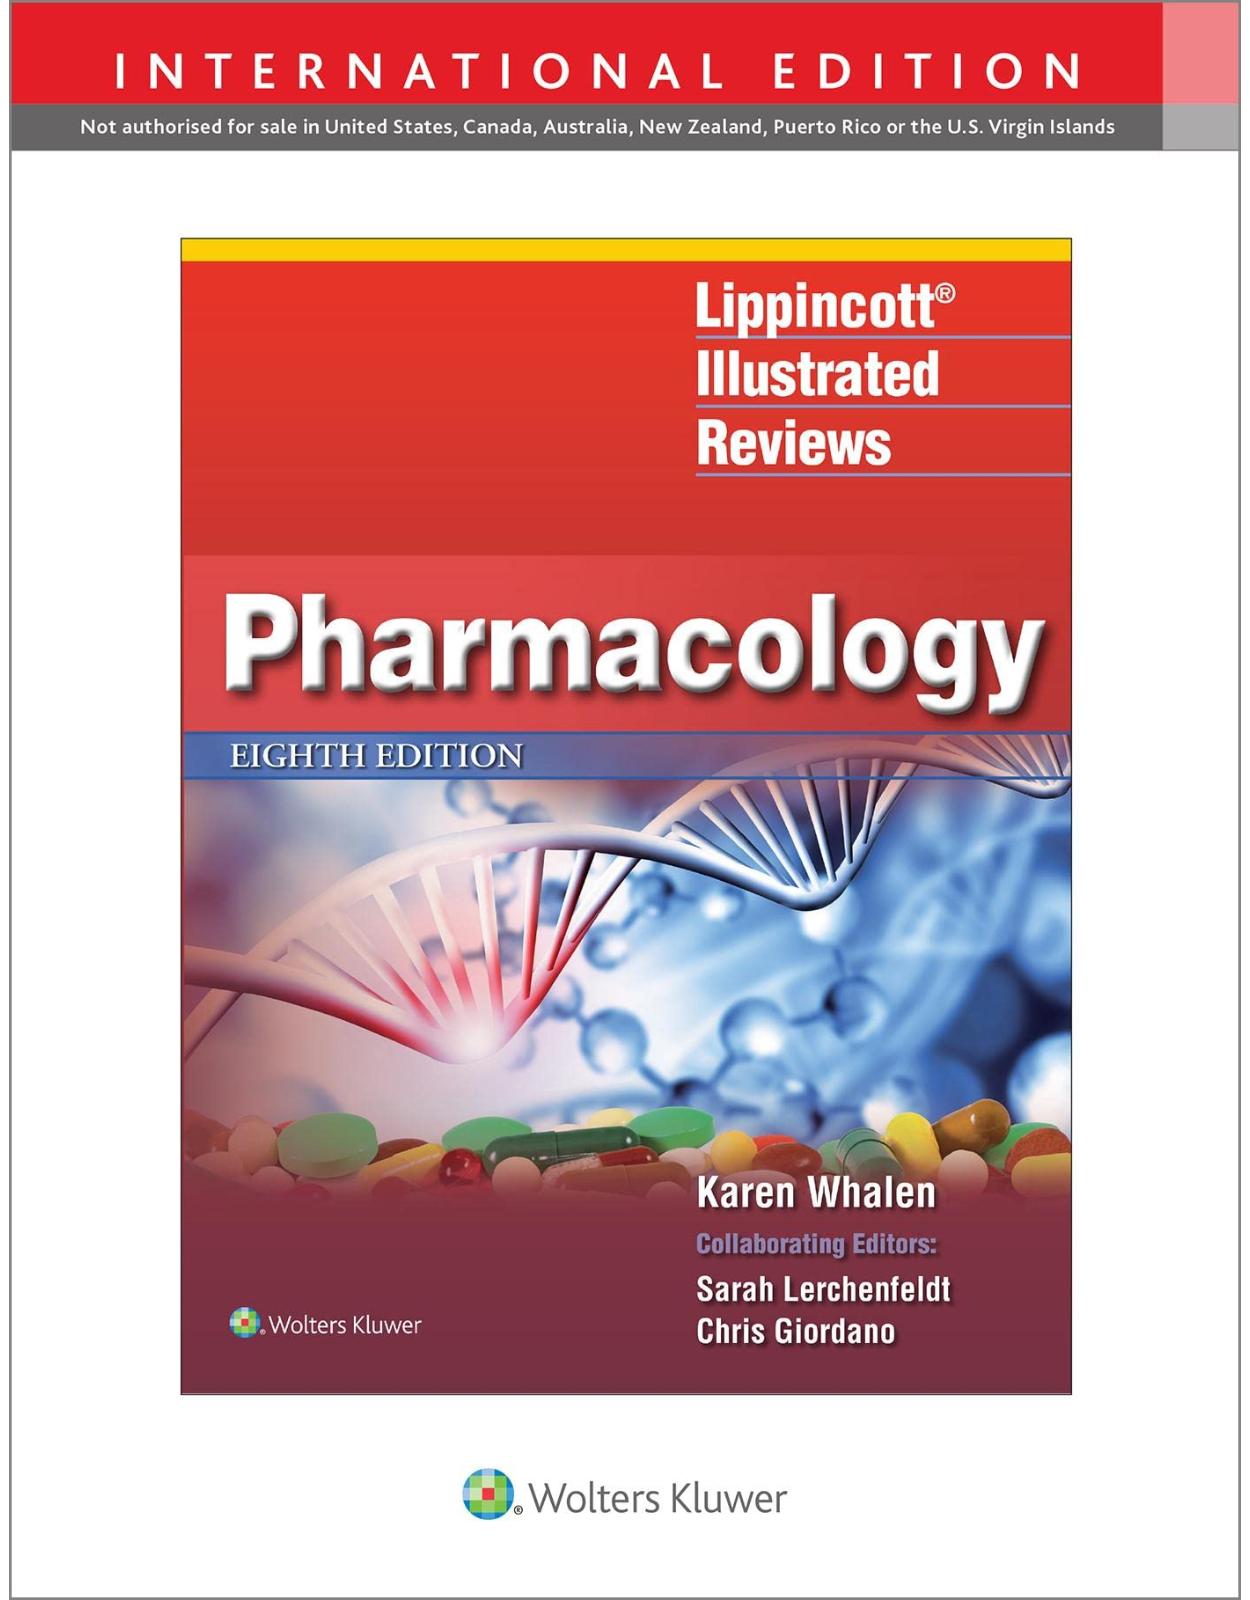 ippincott Illustrated Reviews: Pharmacology